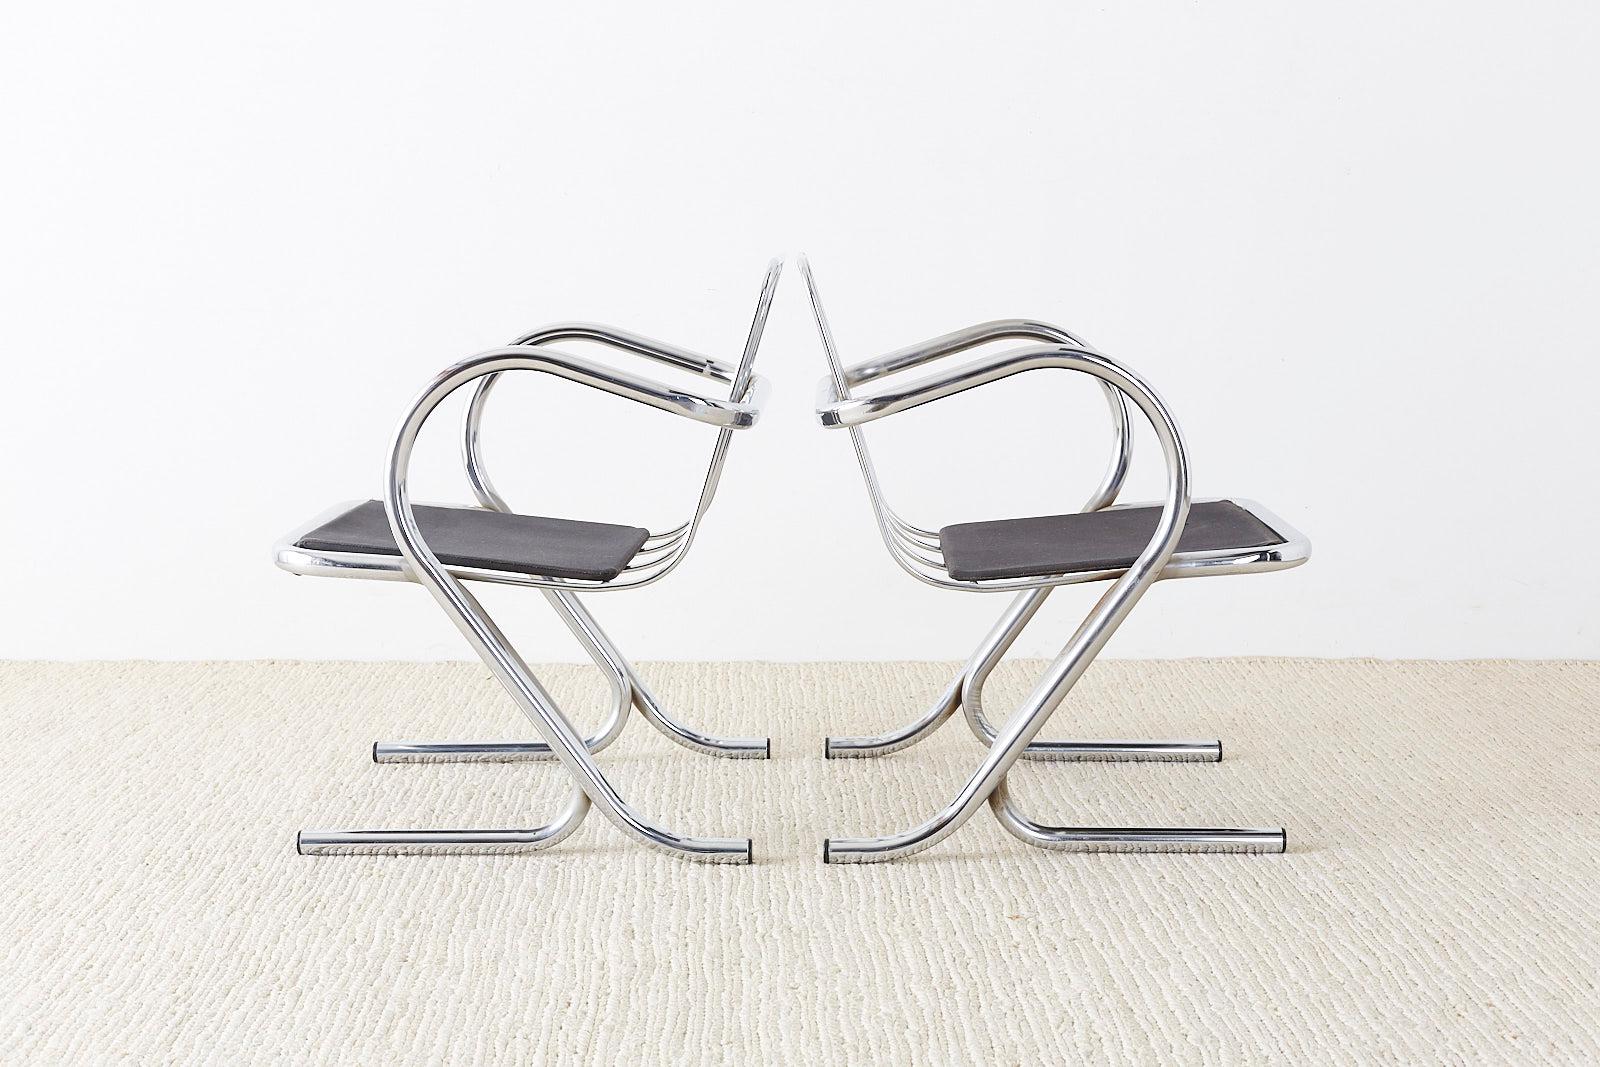 Rare set of ten Mid-Century Modern lounge chairs or armchairs designed by Jerry Johnson. Unique cantilever style constructed from chrome tube frames with canvas slings for support. Graceful curves on the arms which form legs that split into two